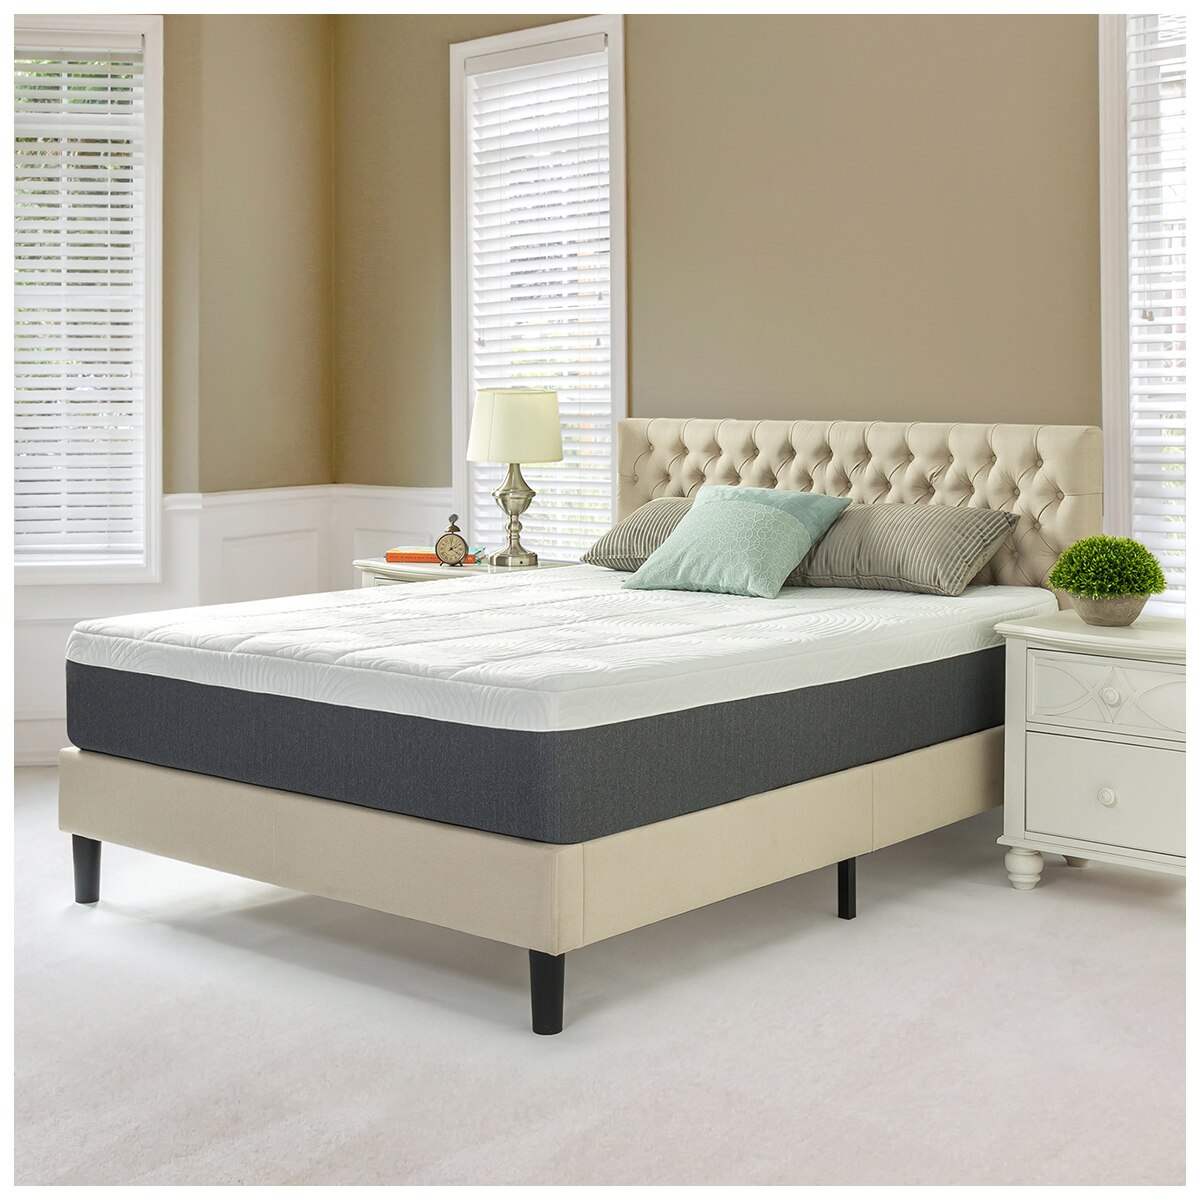 Upholstered Grand Button Tufted Platform Bed Beige Double (Zinus)